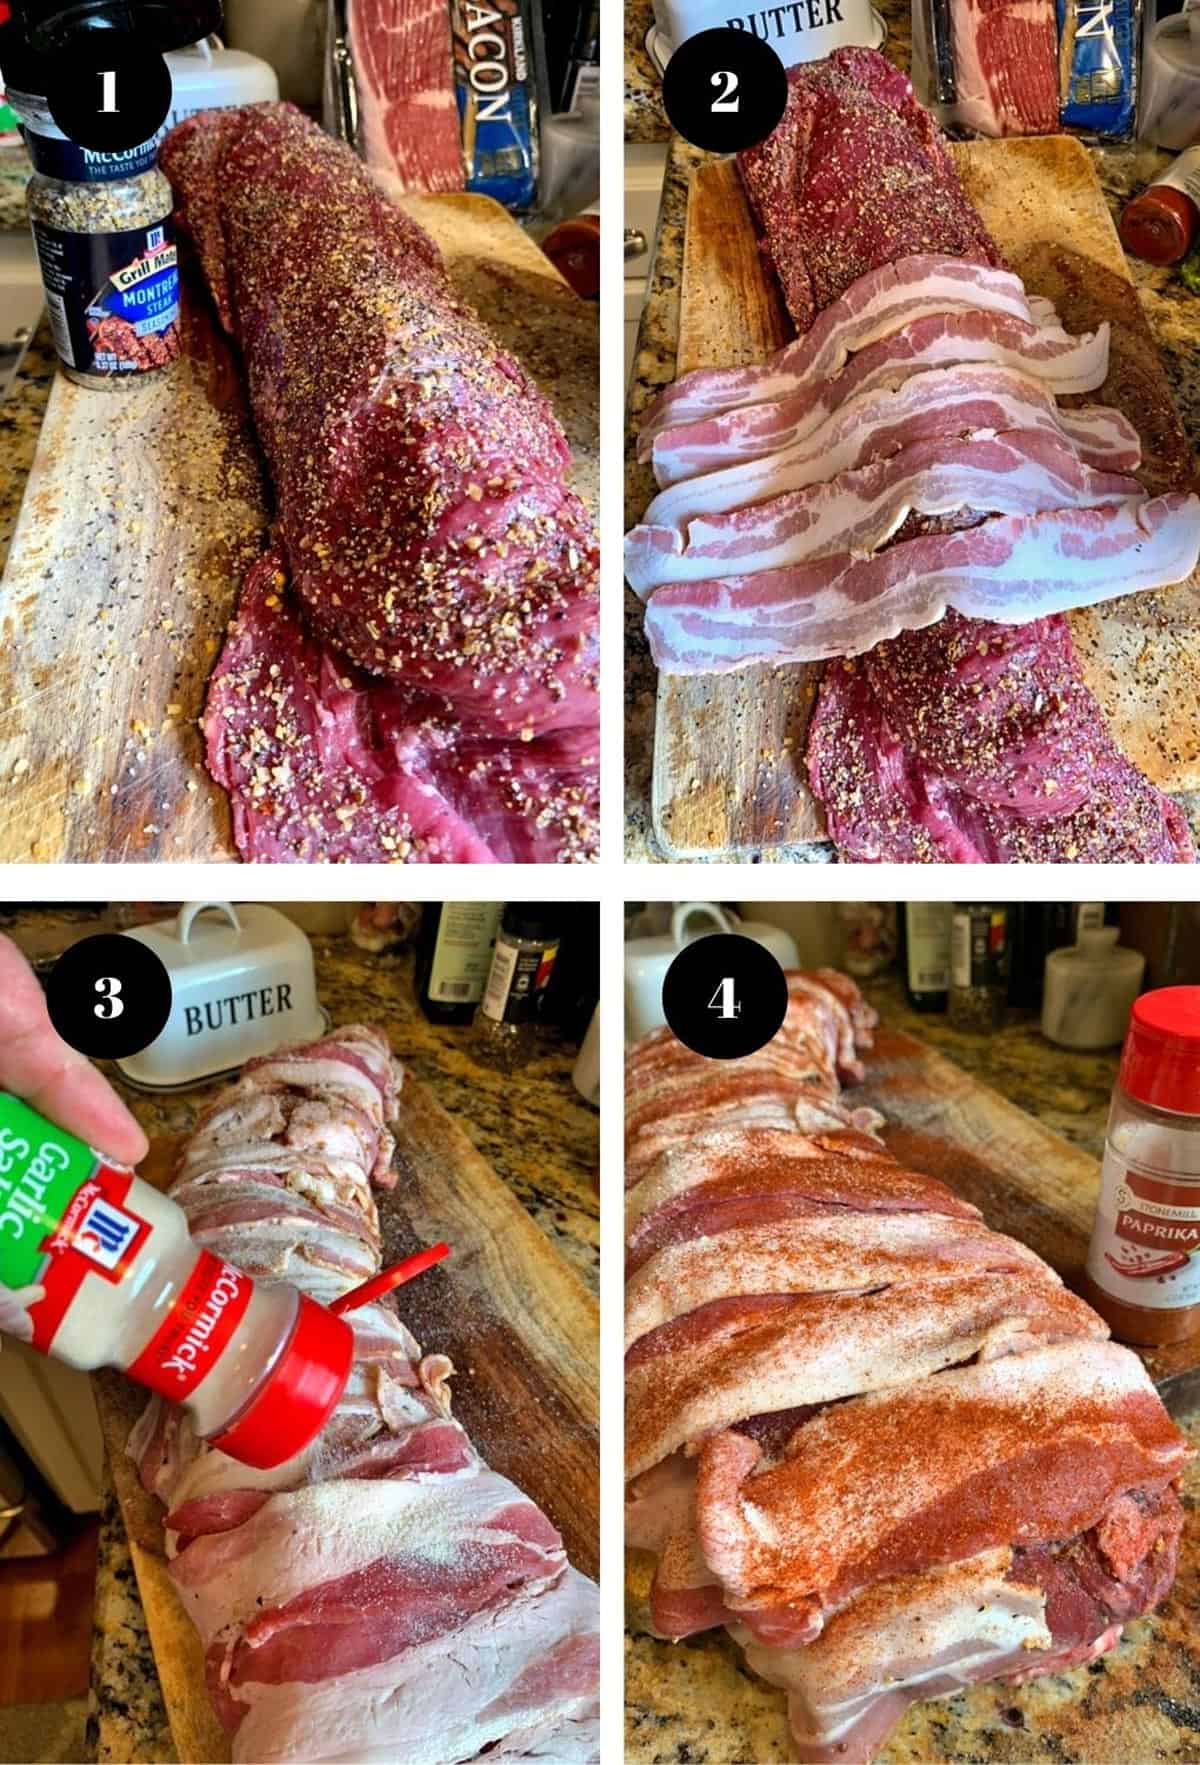 Seasoning a whole beef tenderloin and wrapping it in bacon.